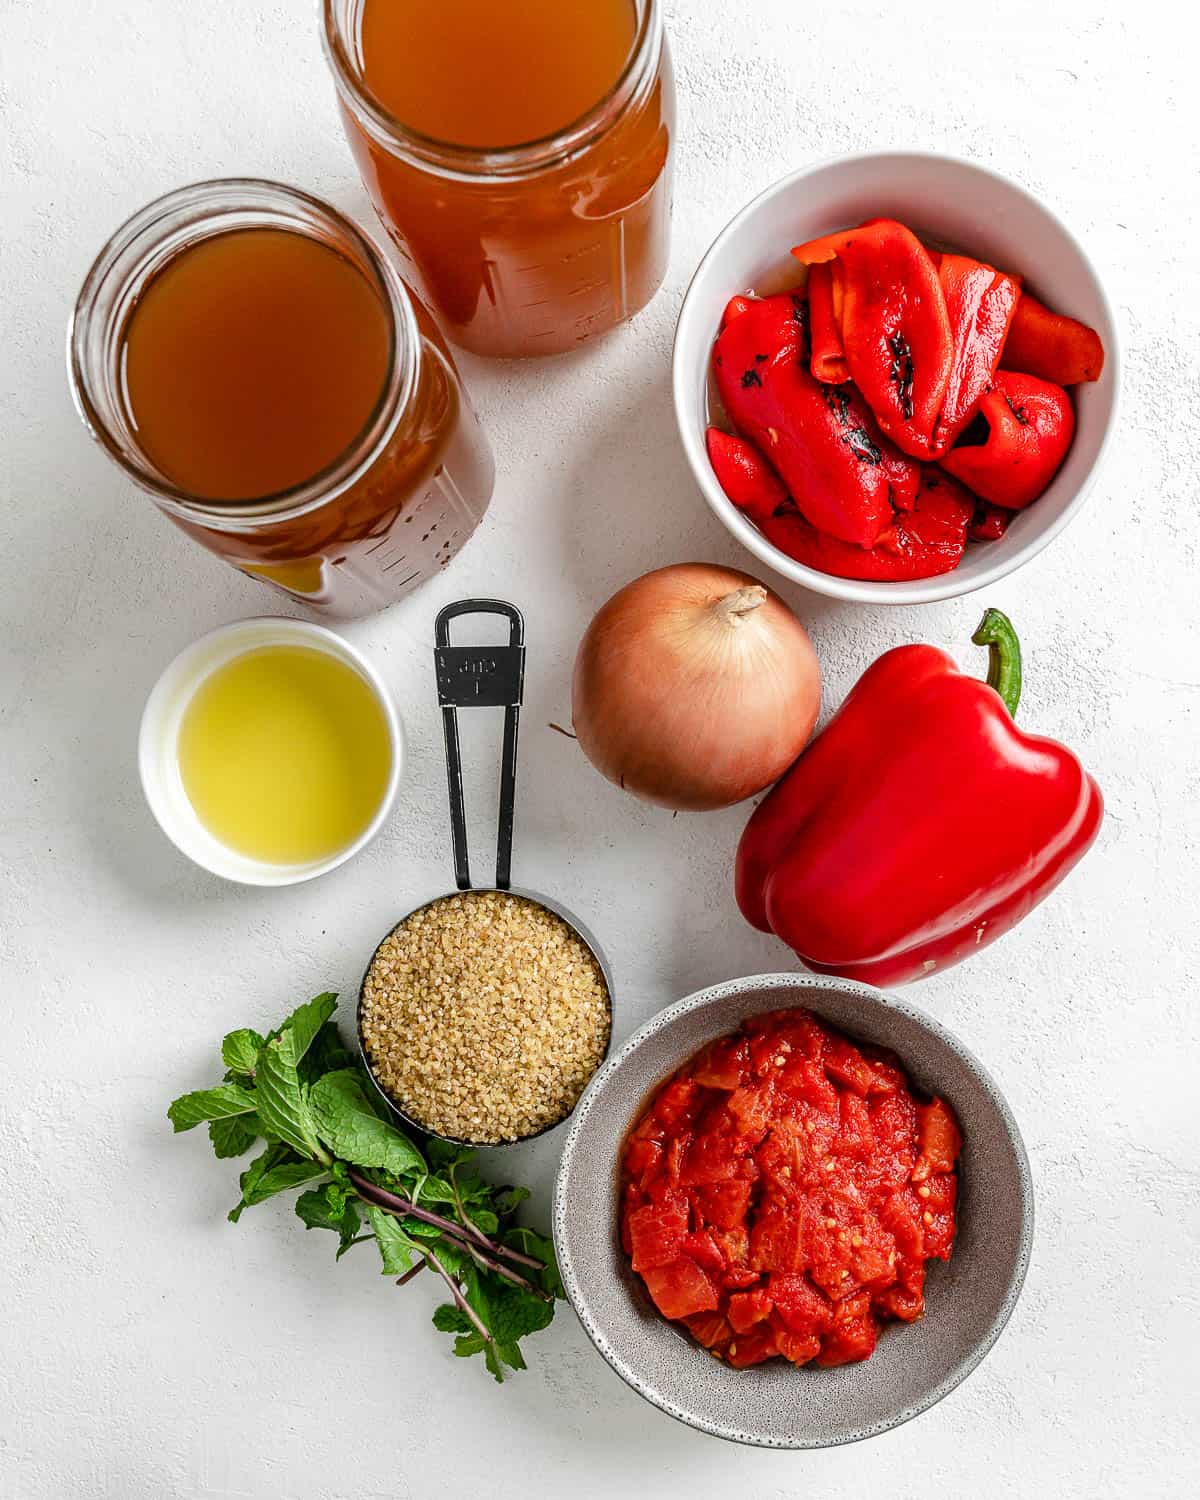 ingredients for Turkish Tomato, Bulgur, and Red Pepper Soup against a white surface